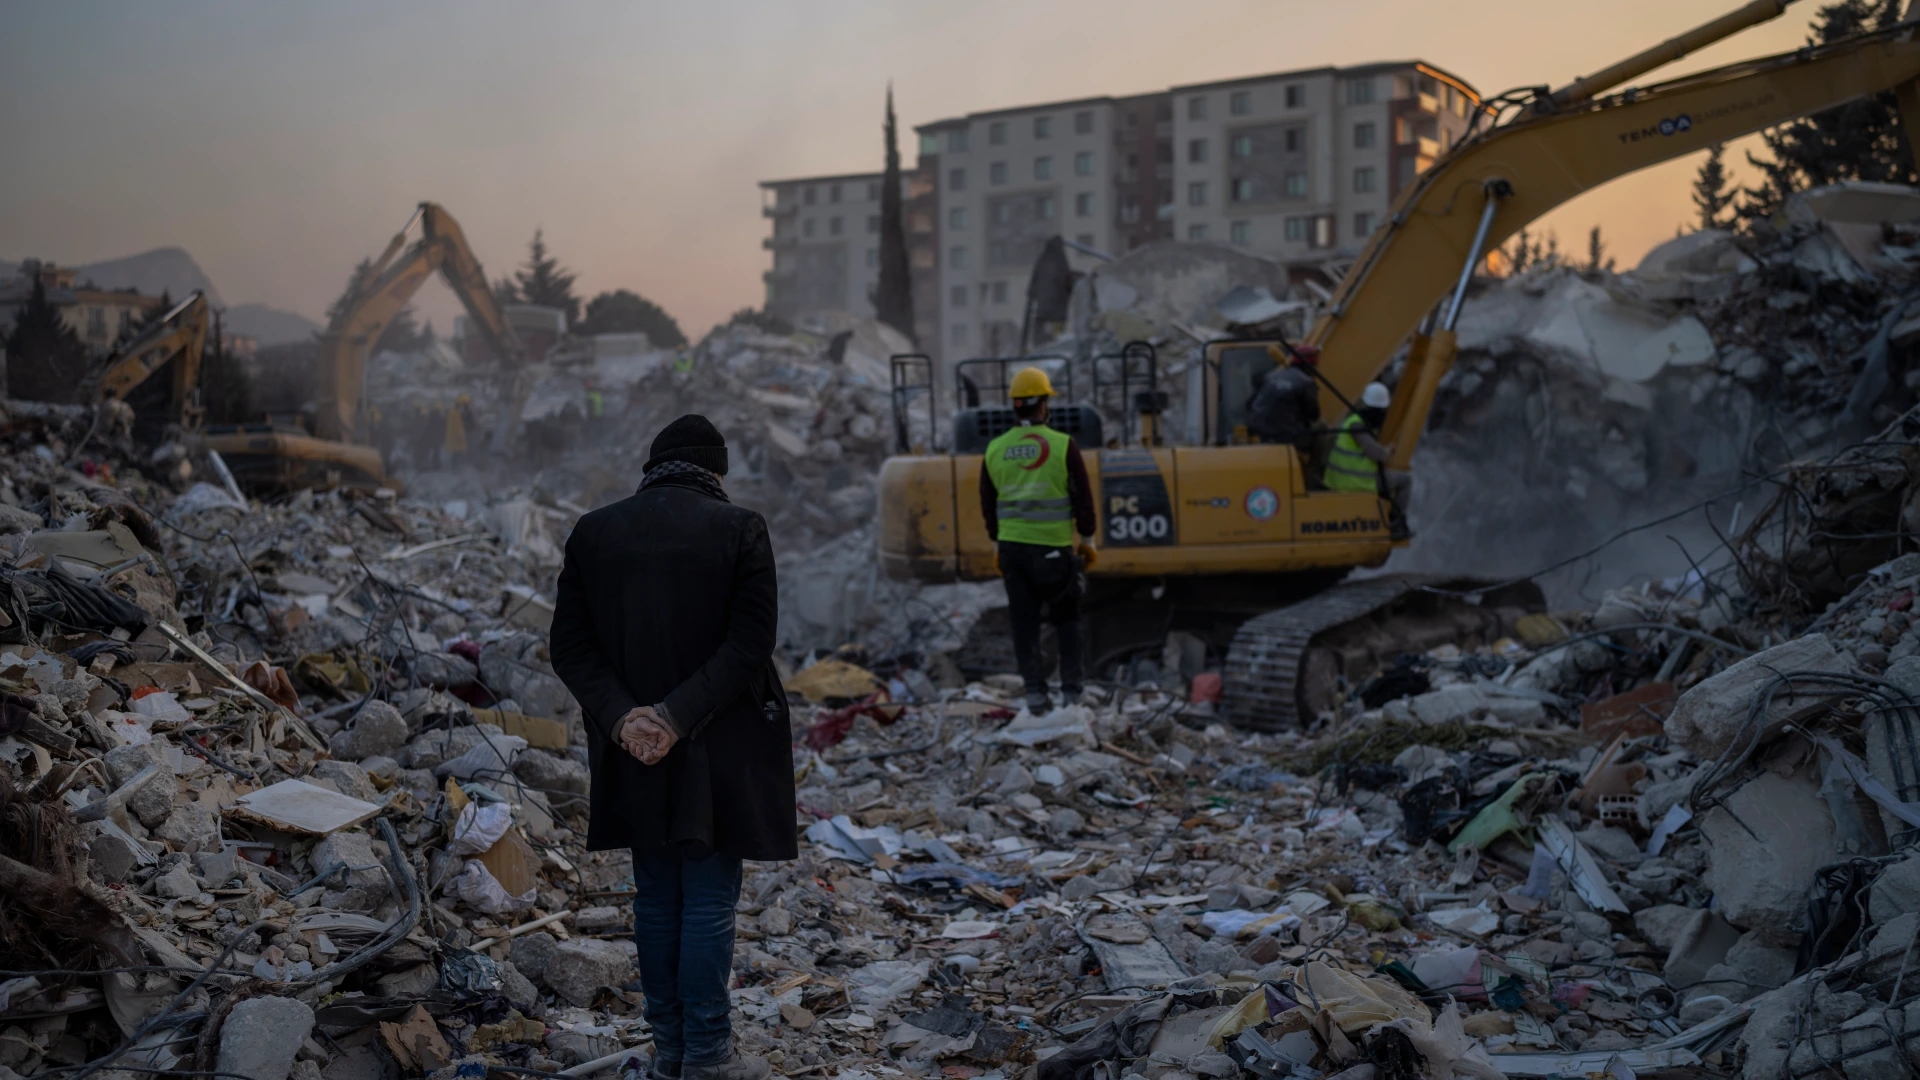 ‘Only Bones Left’: Turkey Families Look For Remains As Hopes Fade